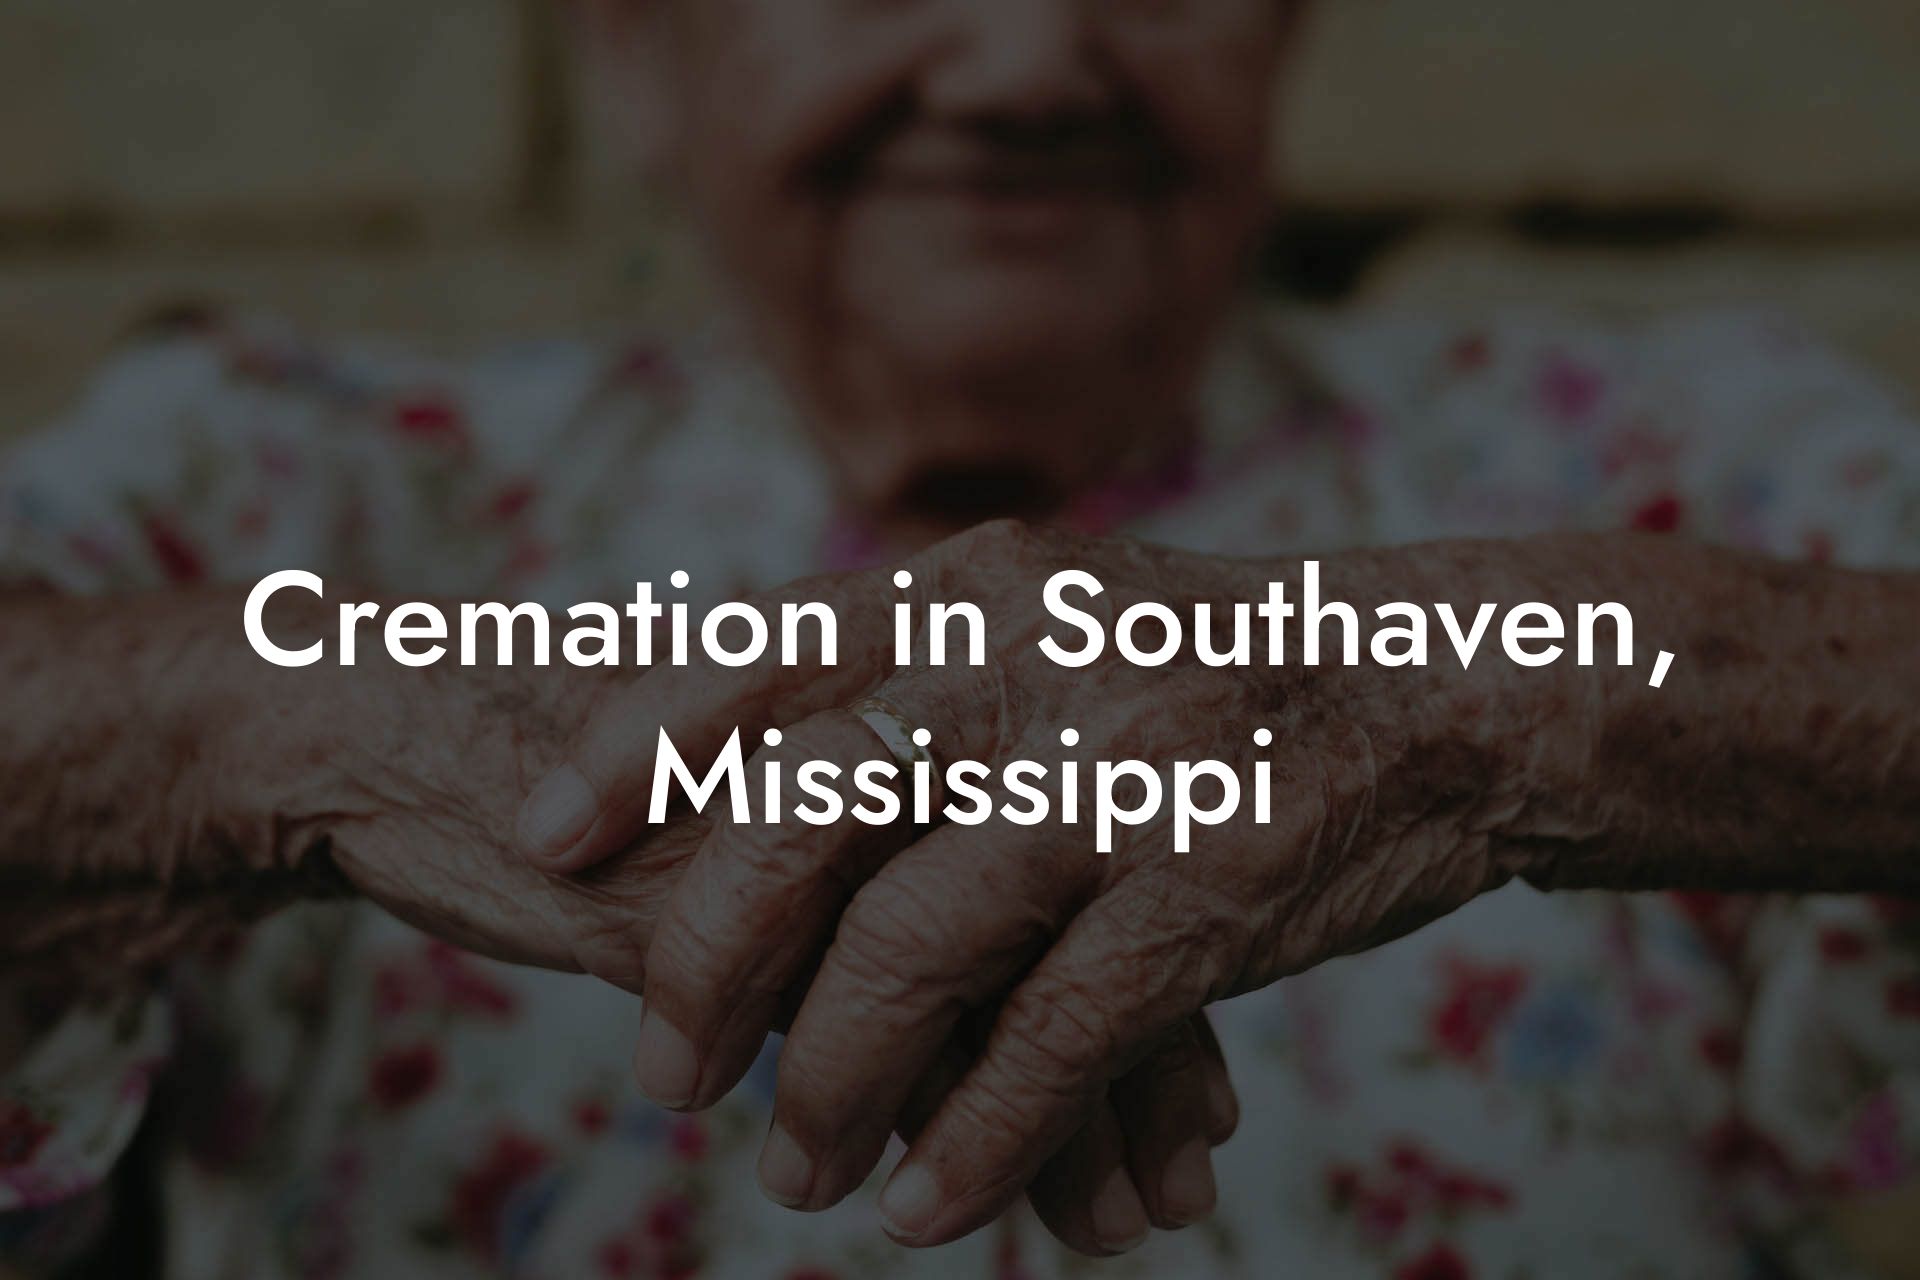 Cremation in Southaven, Mississippi